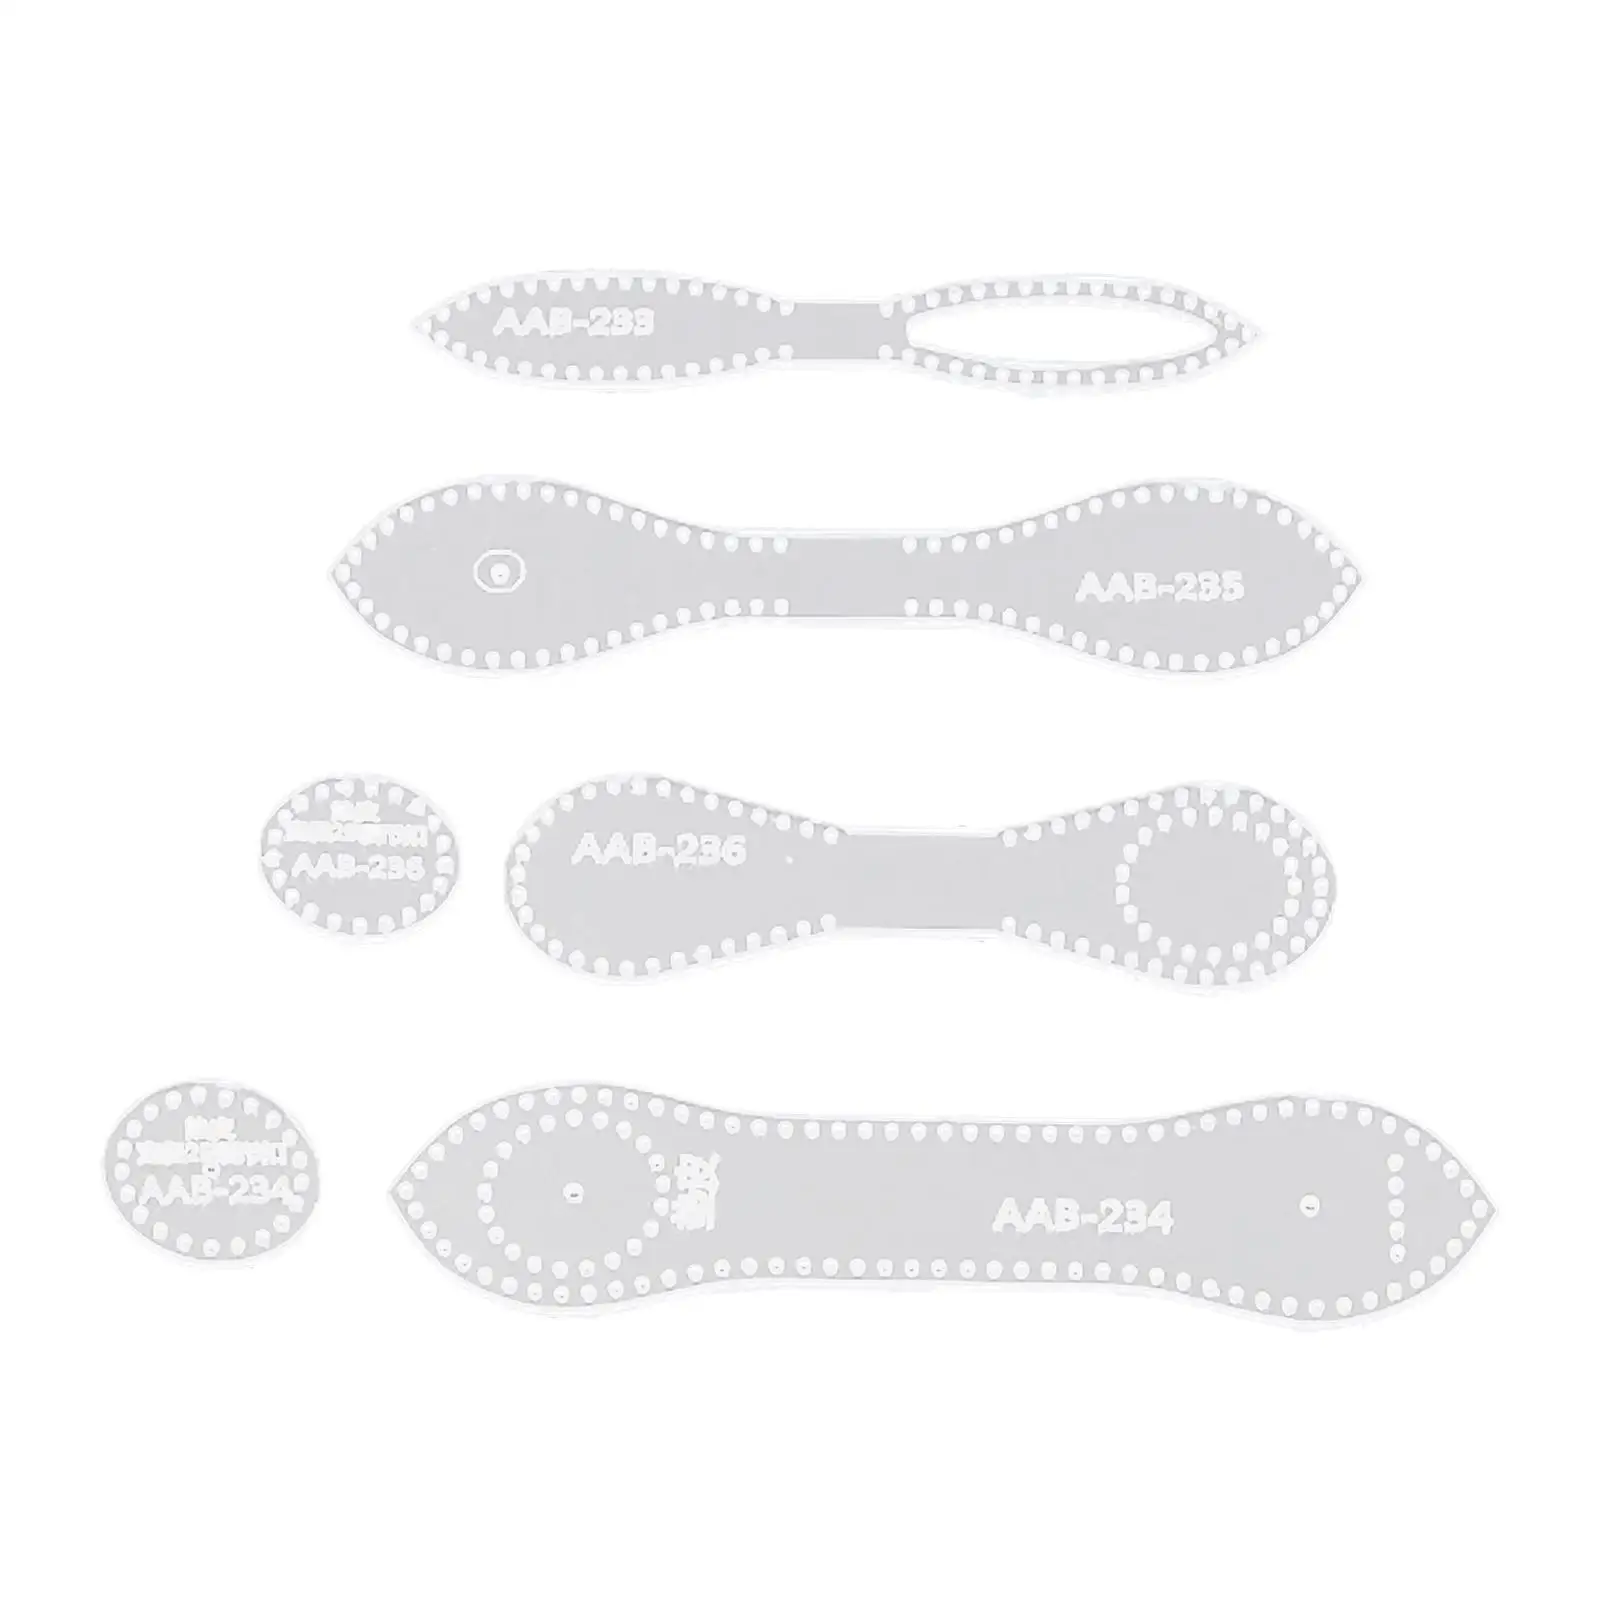 4x Acrylic Keychain Template Pattern Stencil Patchwork DIY for Projects